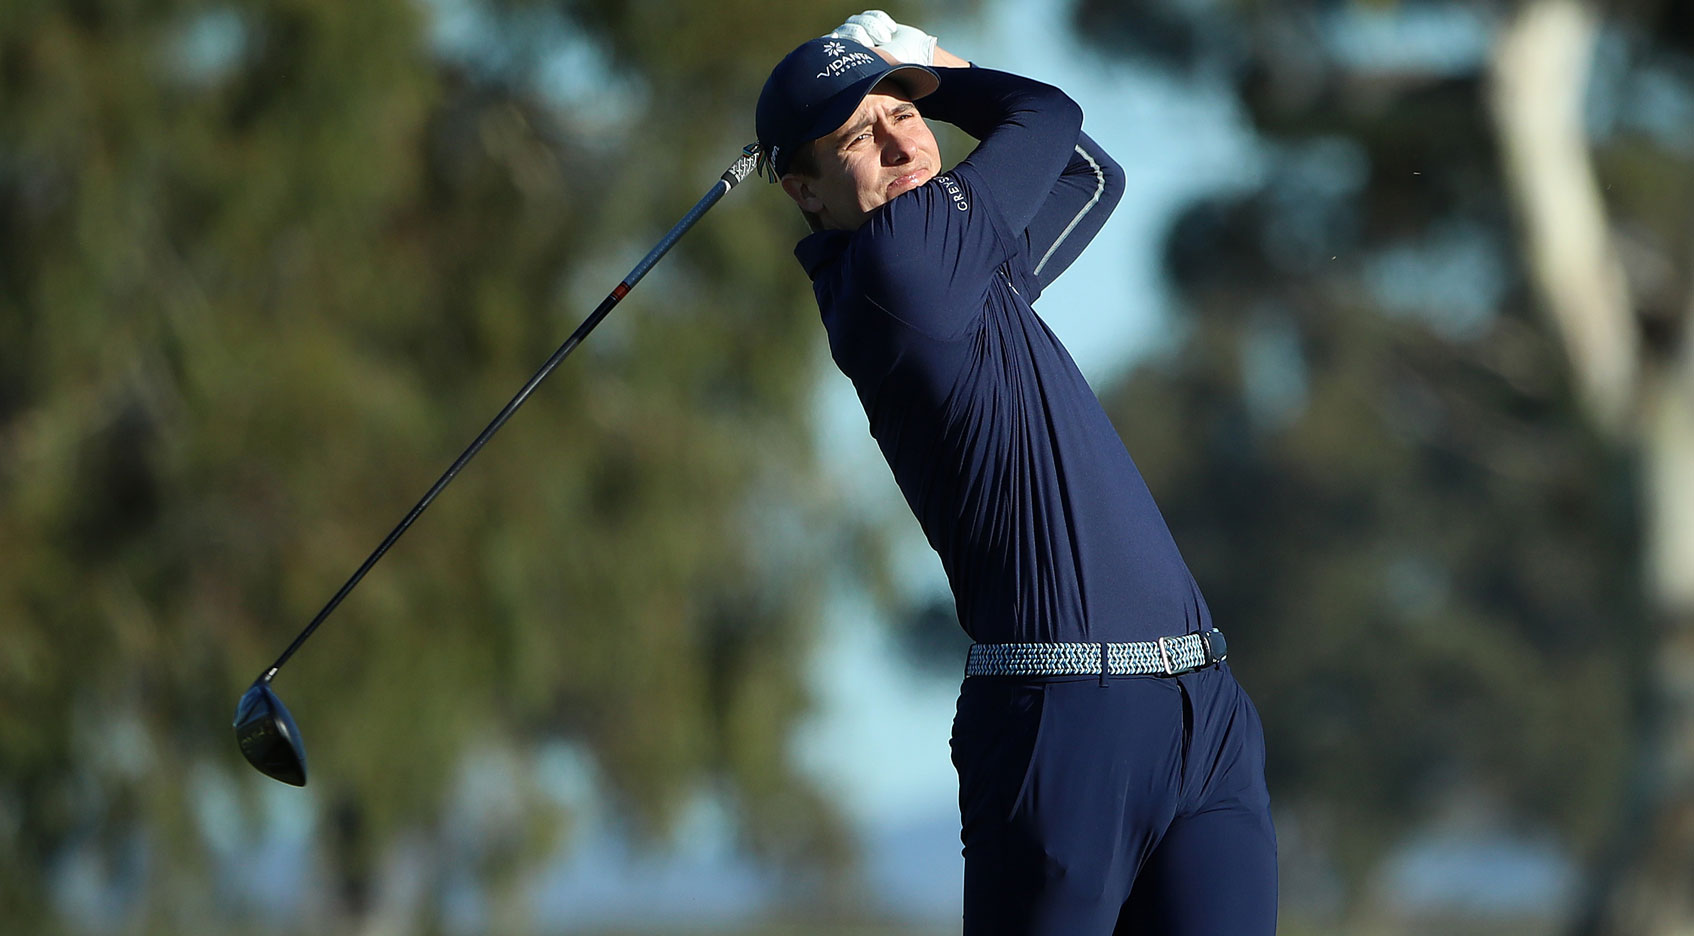 Ortiz, Reed share lead at Farmers Insurance Open